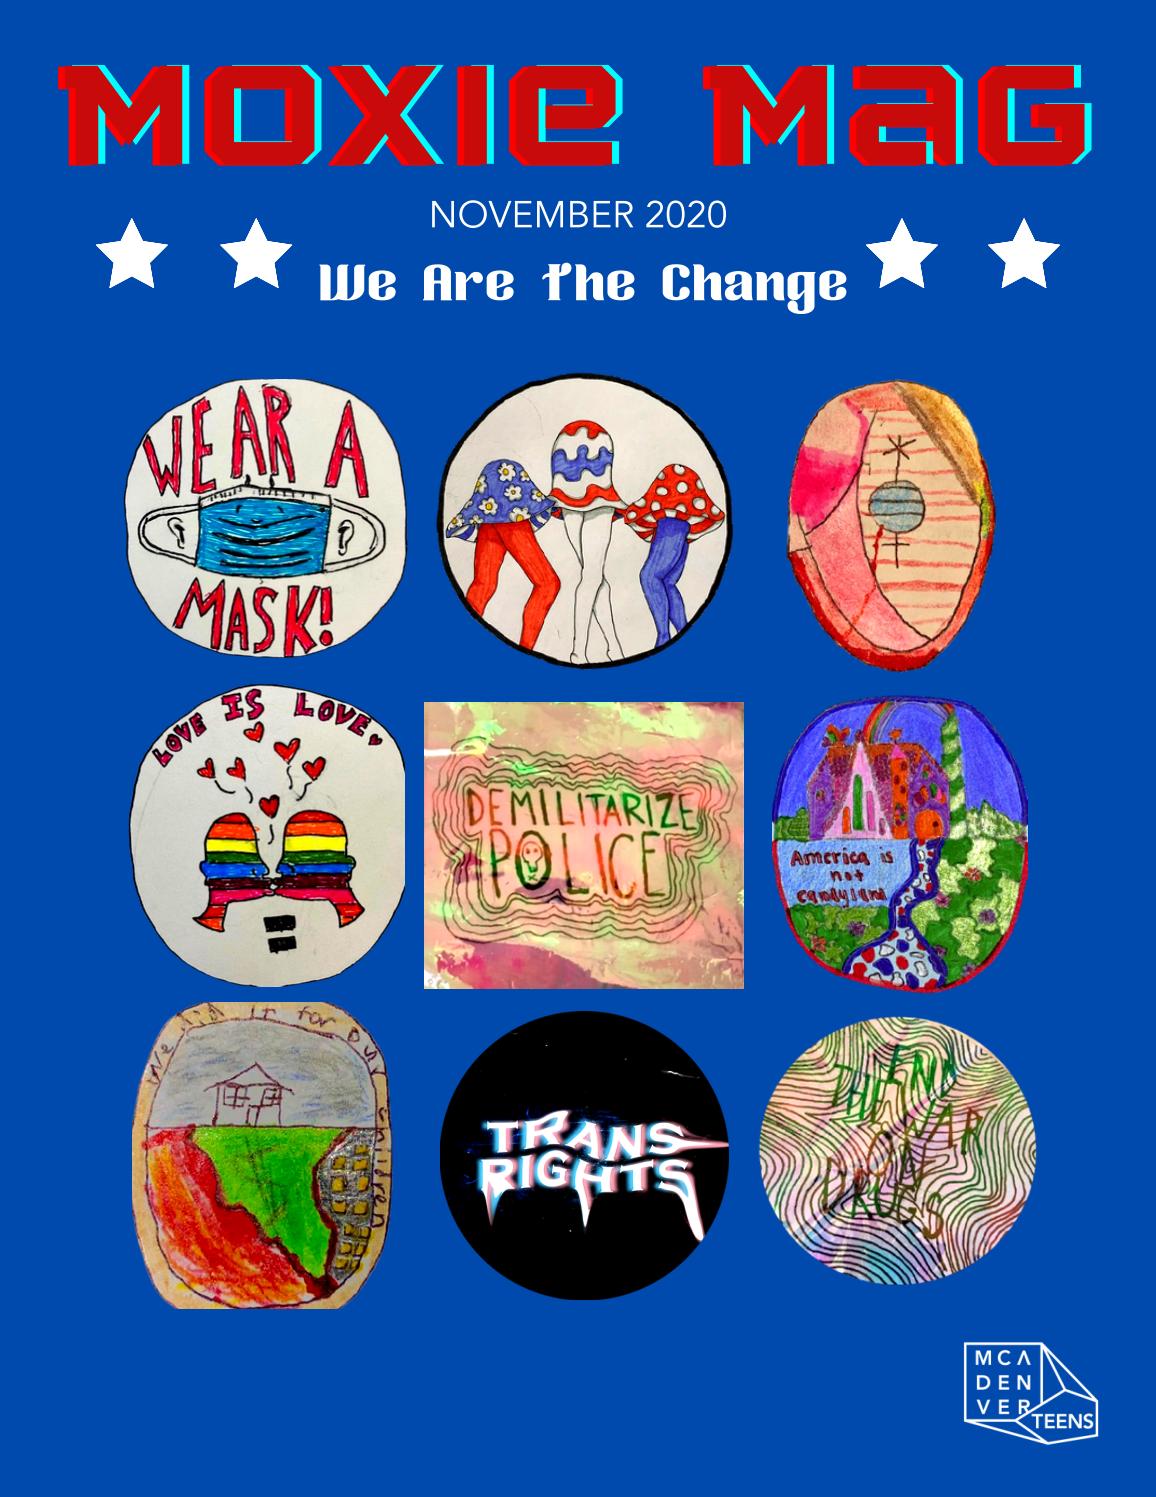 The cover of the November issue of Moxie Mag. The title reads, “MOXIE MAG NOVEMBER 2020, We Are the Change” and the MCA Denver teen logo is in the bottom right corner. The cover is a bright, cobalt blue, and nine illustrations sit in the center, each contained within a circle or square shape. Each illustration addresses a different political or human rights issues. 